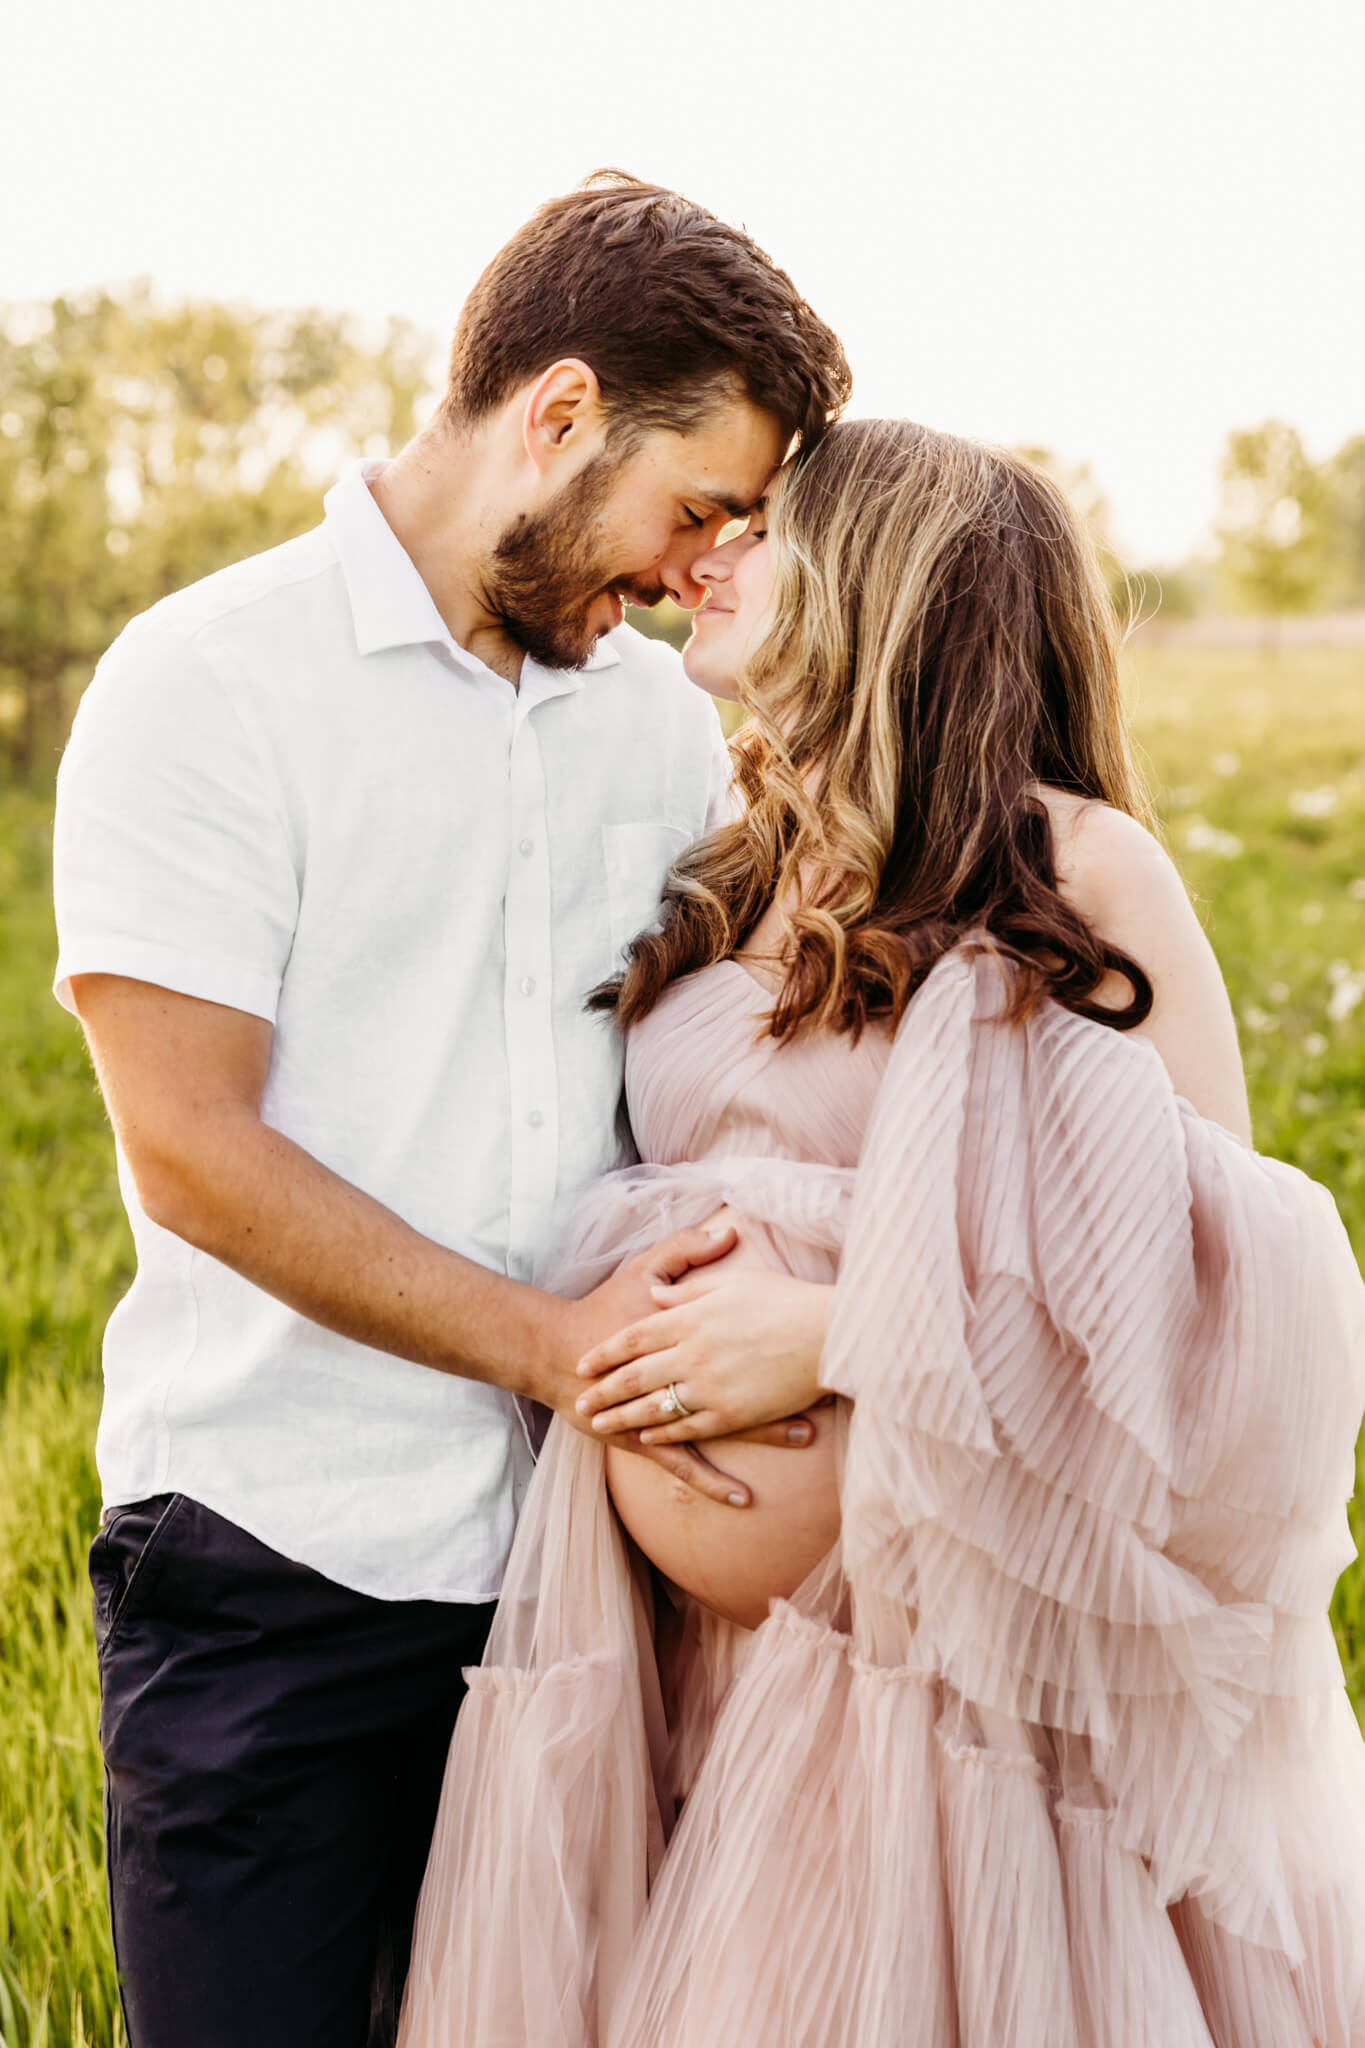 gorgeous couple holding each other and embracing their soon to be baby as they touch foreheads in a park near Oshkosh